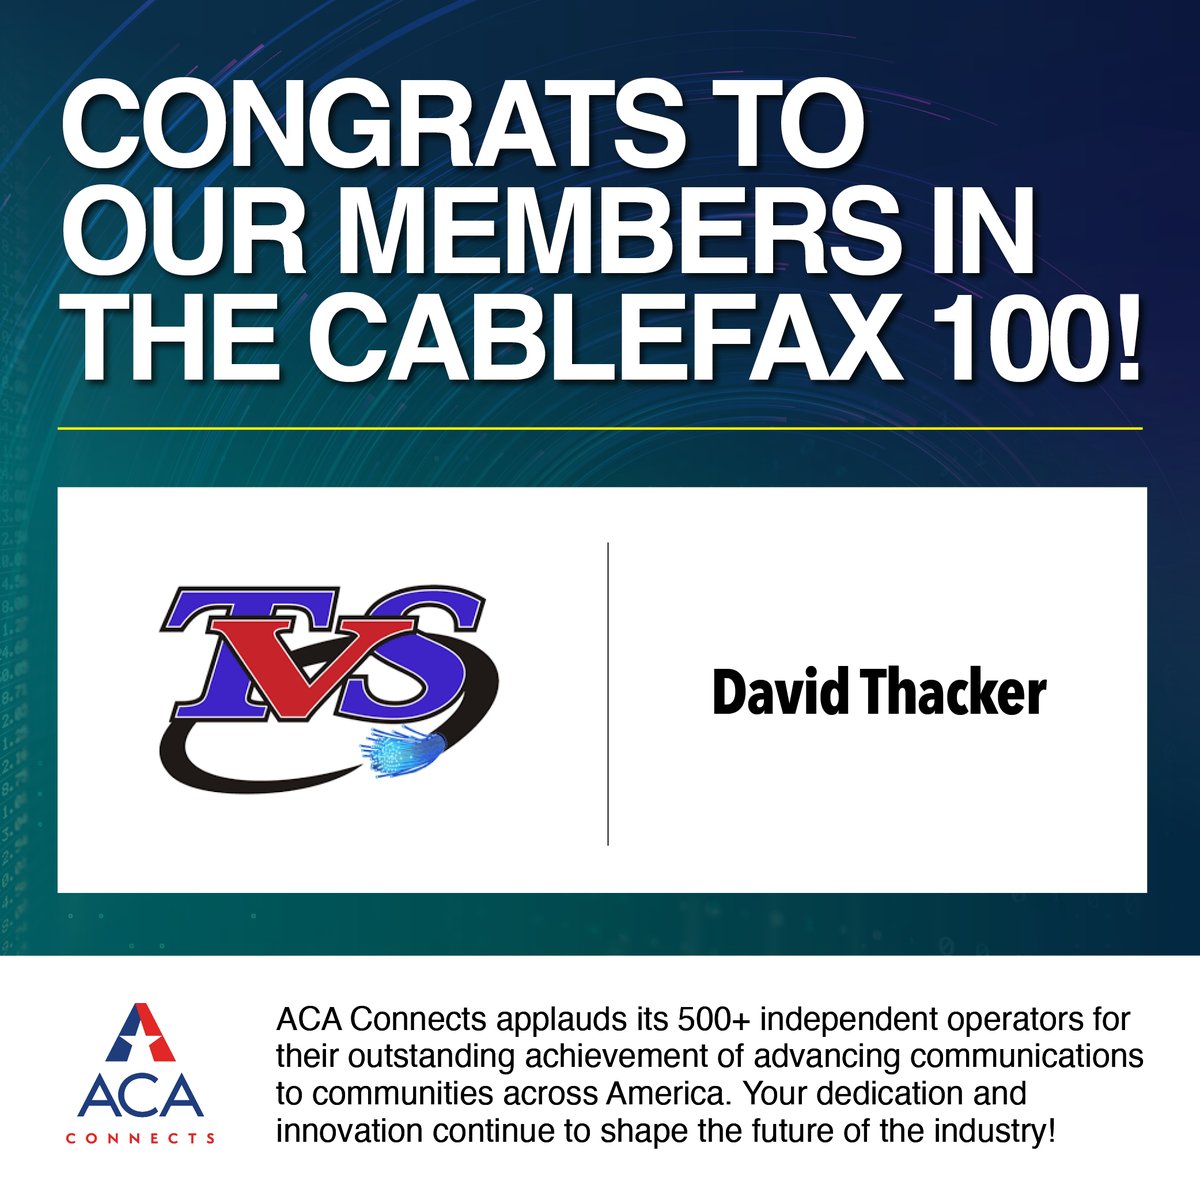 Congratulations to David Thacker of @tvs_cable, an ACA Connects Member, for being honored in the @Cablefax 100 issue. cablefax.com/event/cablefax…